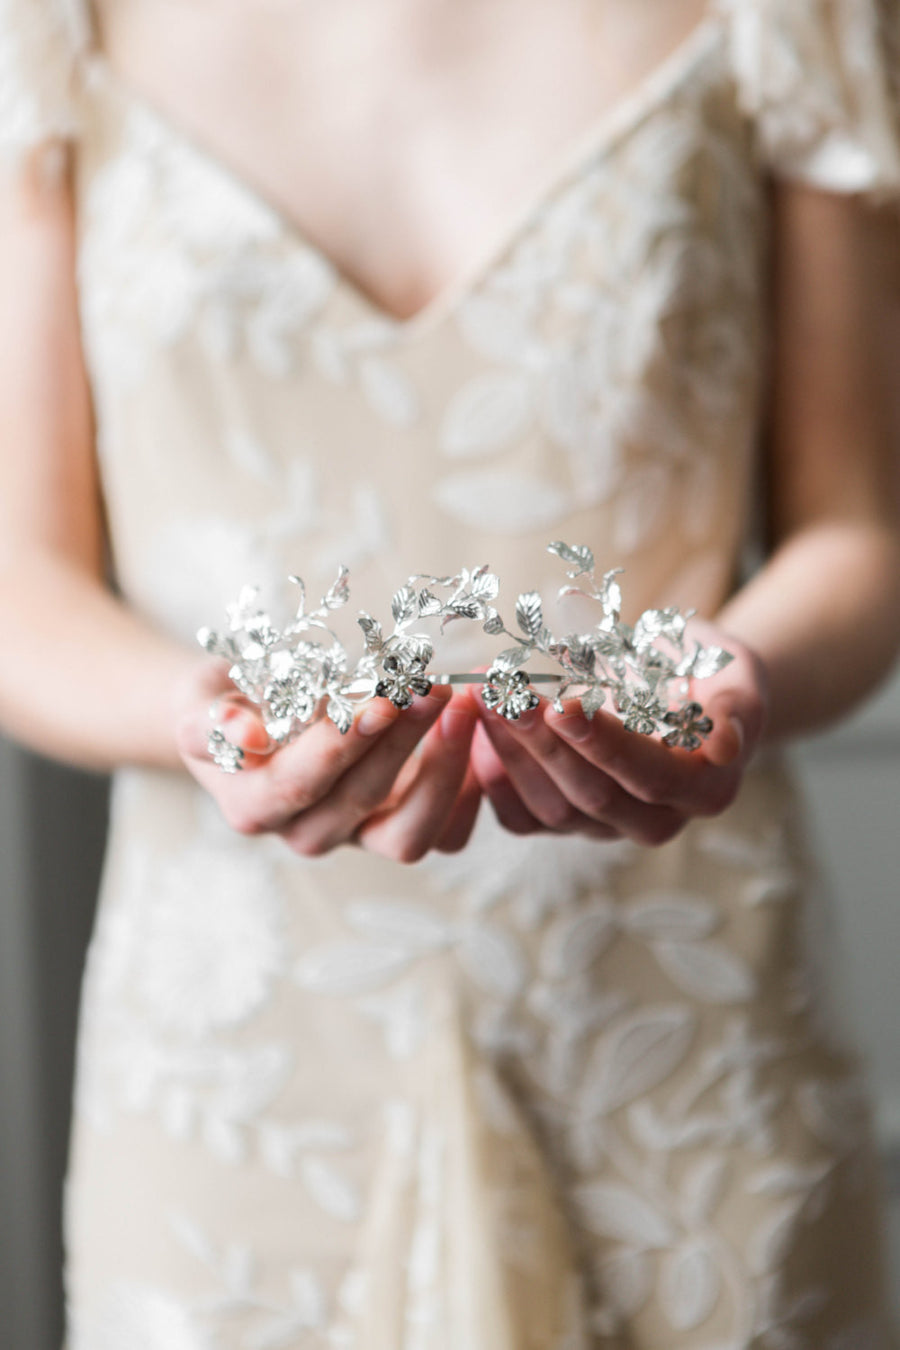 Bride wearing a silver headpice made replica antique myrtle leaves